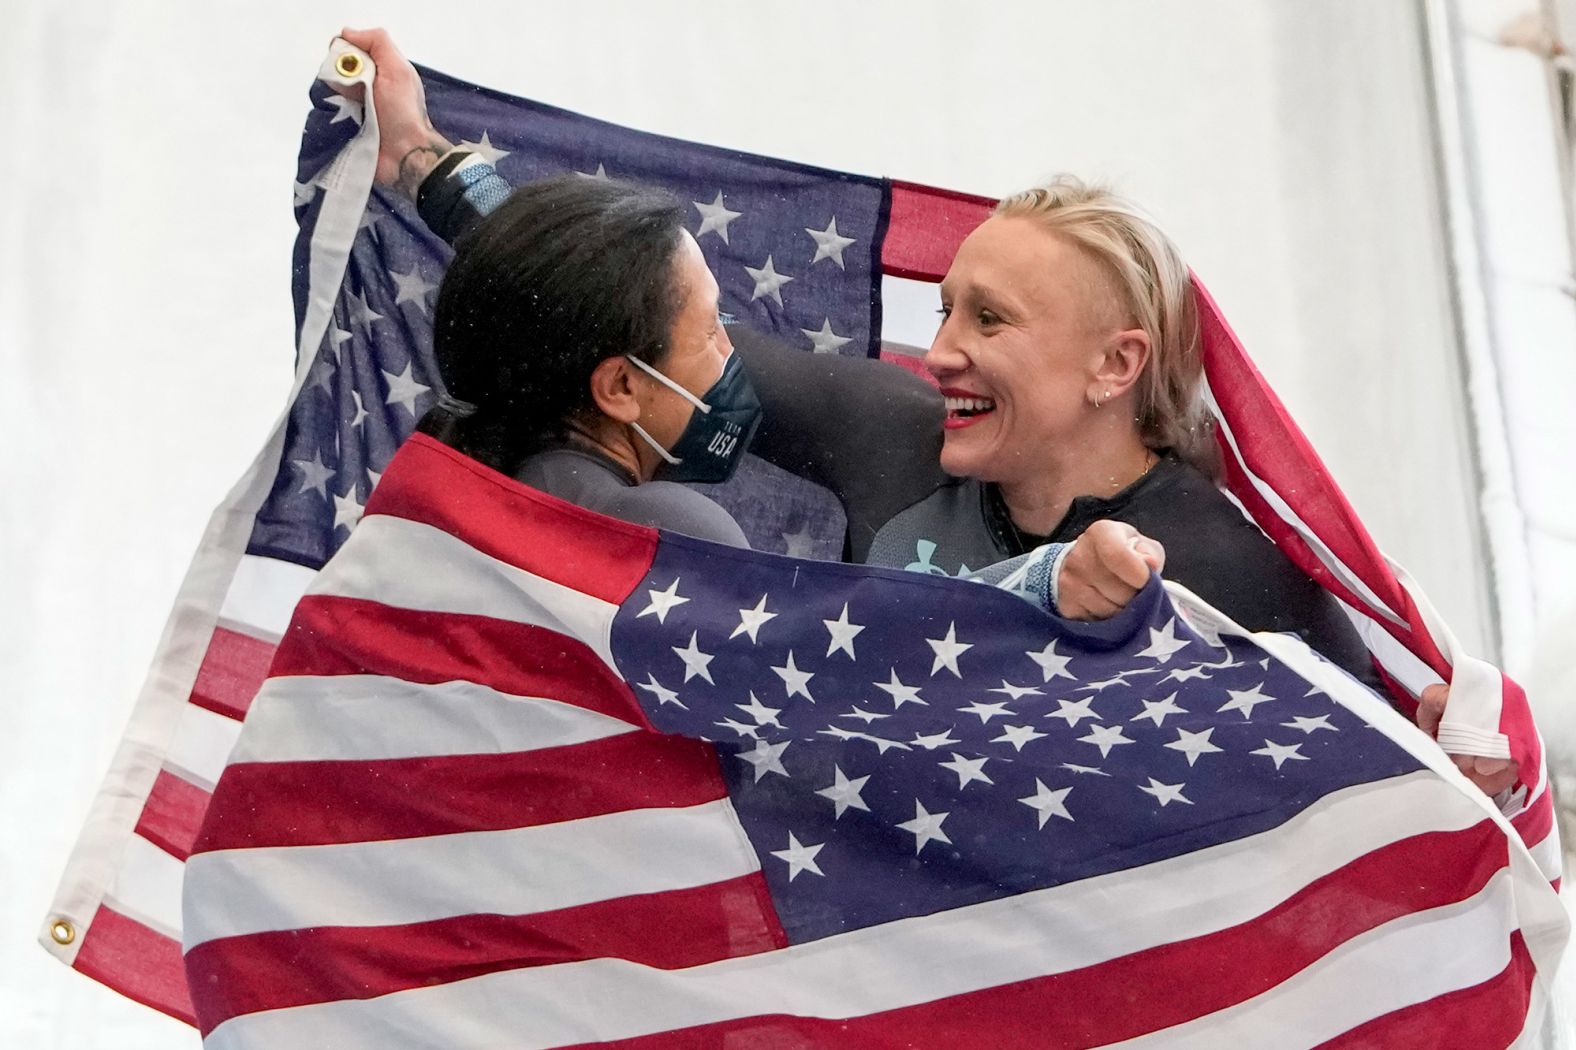 American bobsledders Elana Meyers Taylor, left, and Kaillie Humphries celebrate after winning silver and gold medals, respectively, in the monobob on February 14. <a href="index.php?page=&url=https%3A%2F%2Fwww.cnn.com%2Fworld%2Flive-news%2Fbeijing-winter-olympics-02-14-22-spt%2Fh_b3fd6012a07387e989327e1aaf215404" target="_blank">They're the first women to win bobsled medals at four consecutive Winter Olympics.</a> Humphries had two golds and a bronze from past Olympic Games. Meyers Taylor had two silvers and a bronze. 